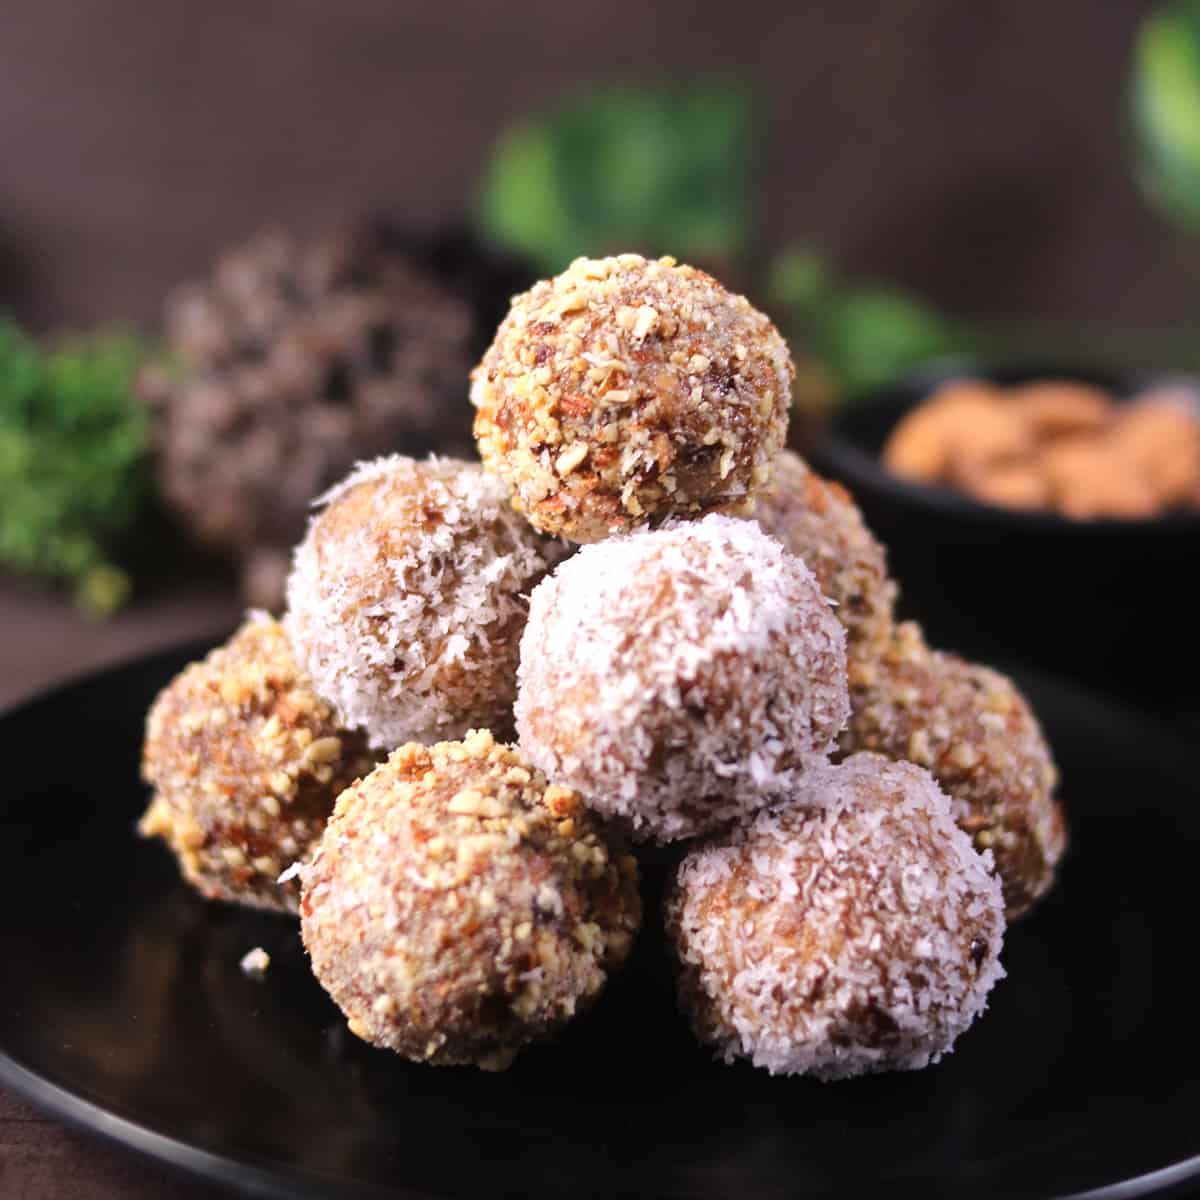 Coconut date balls - No Bake Christmas treats. Energy balls decorated with almonds and coconut. 